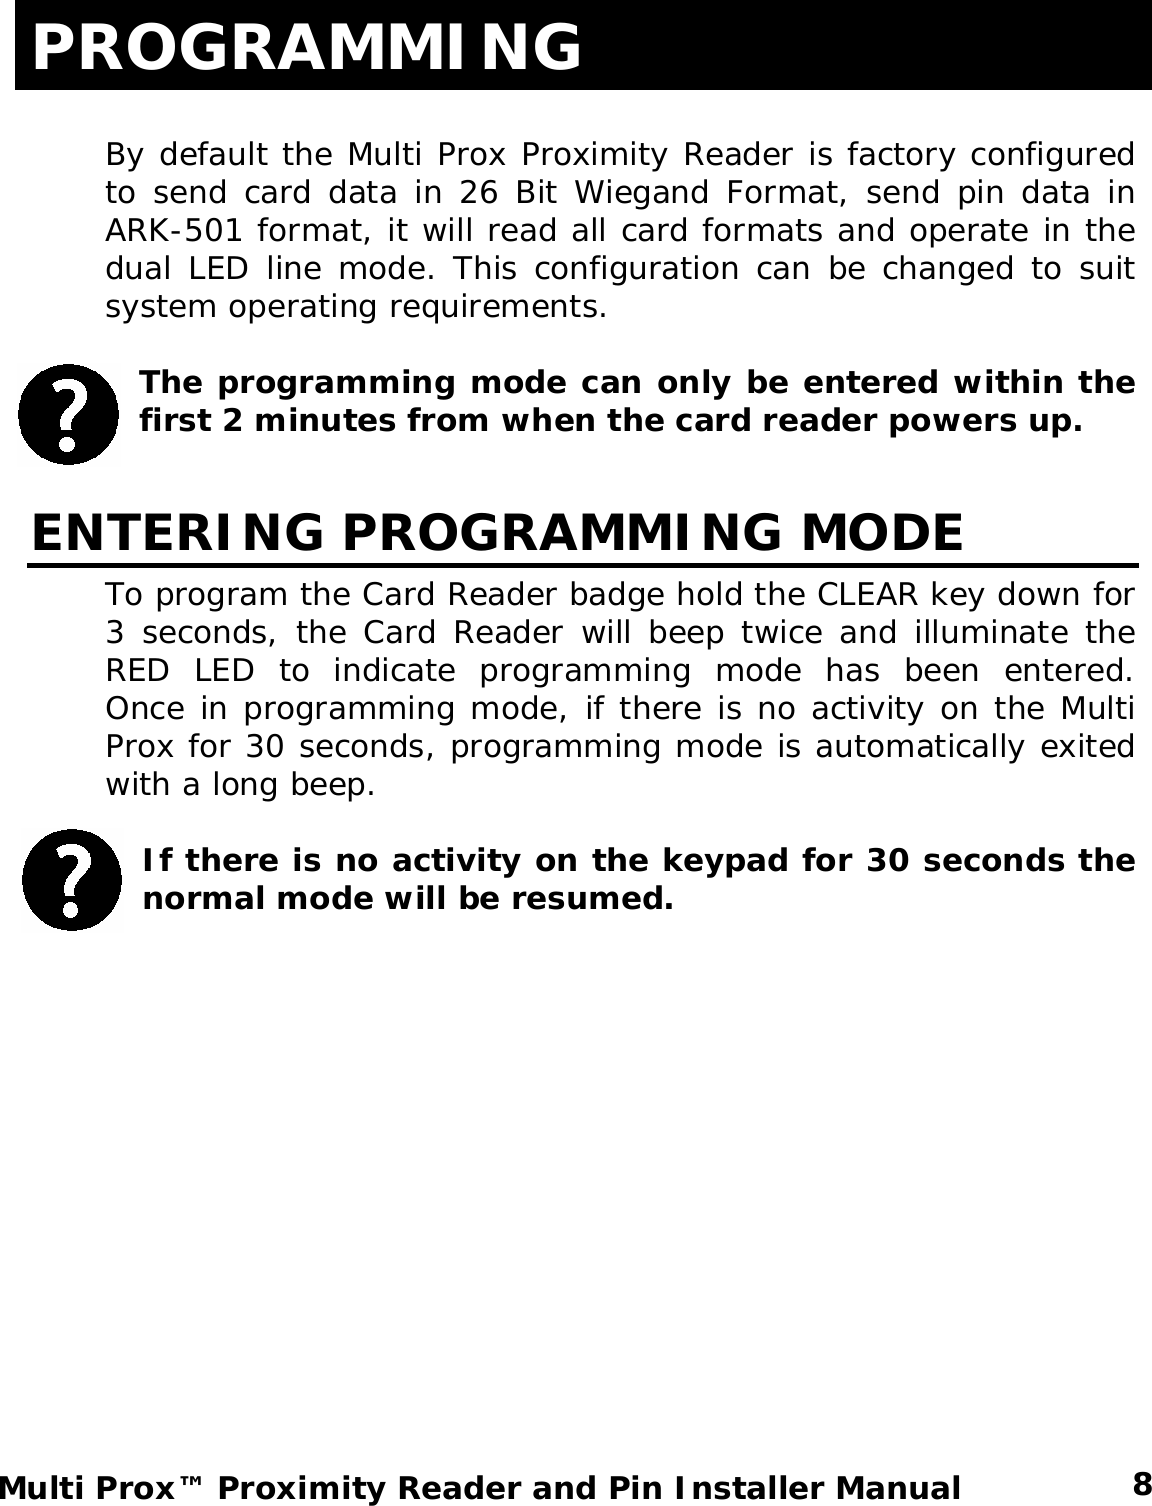 PROGRAMMING  By default the Multi Prox Proximity Reader is factory configured to send card data in 26 Bit Wiegand Format, send pin data in ARK-501 format, it will read all card formats and operate in the dual LED line mode. This configuration can be changed to suit system operating requirements.    The programming mode can only be entered within the first 2 minutes from when the card reader powers up.  ENTERING PROGRAMMING MODE To program the Card Reader badge hold the CLEAR key down for 3 seconds, the Card Reader will beep twice and illuminate the RED LED to indicate programming mode has been entered.  Once in programming mode, if there is no activity on the Multi Prox for 30 seconds, programming mode is automatically exited with a long beep.  If there is no activity on the keypad for 30 seconds the normal mode will be resumed.  8 Multi Prox™ Proximity Reader and Pin Installer Manual 